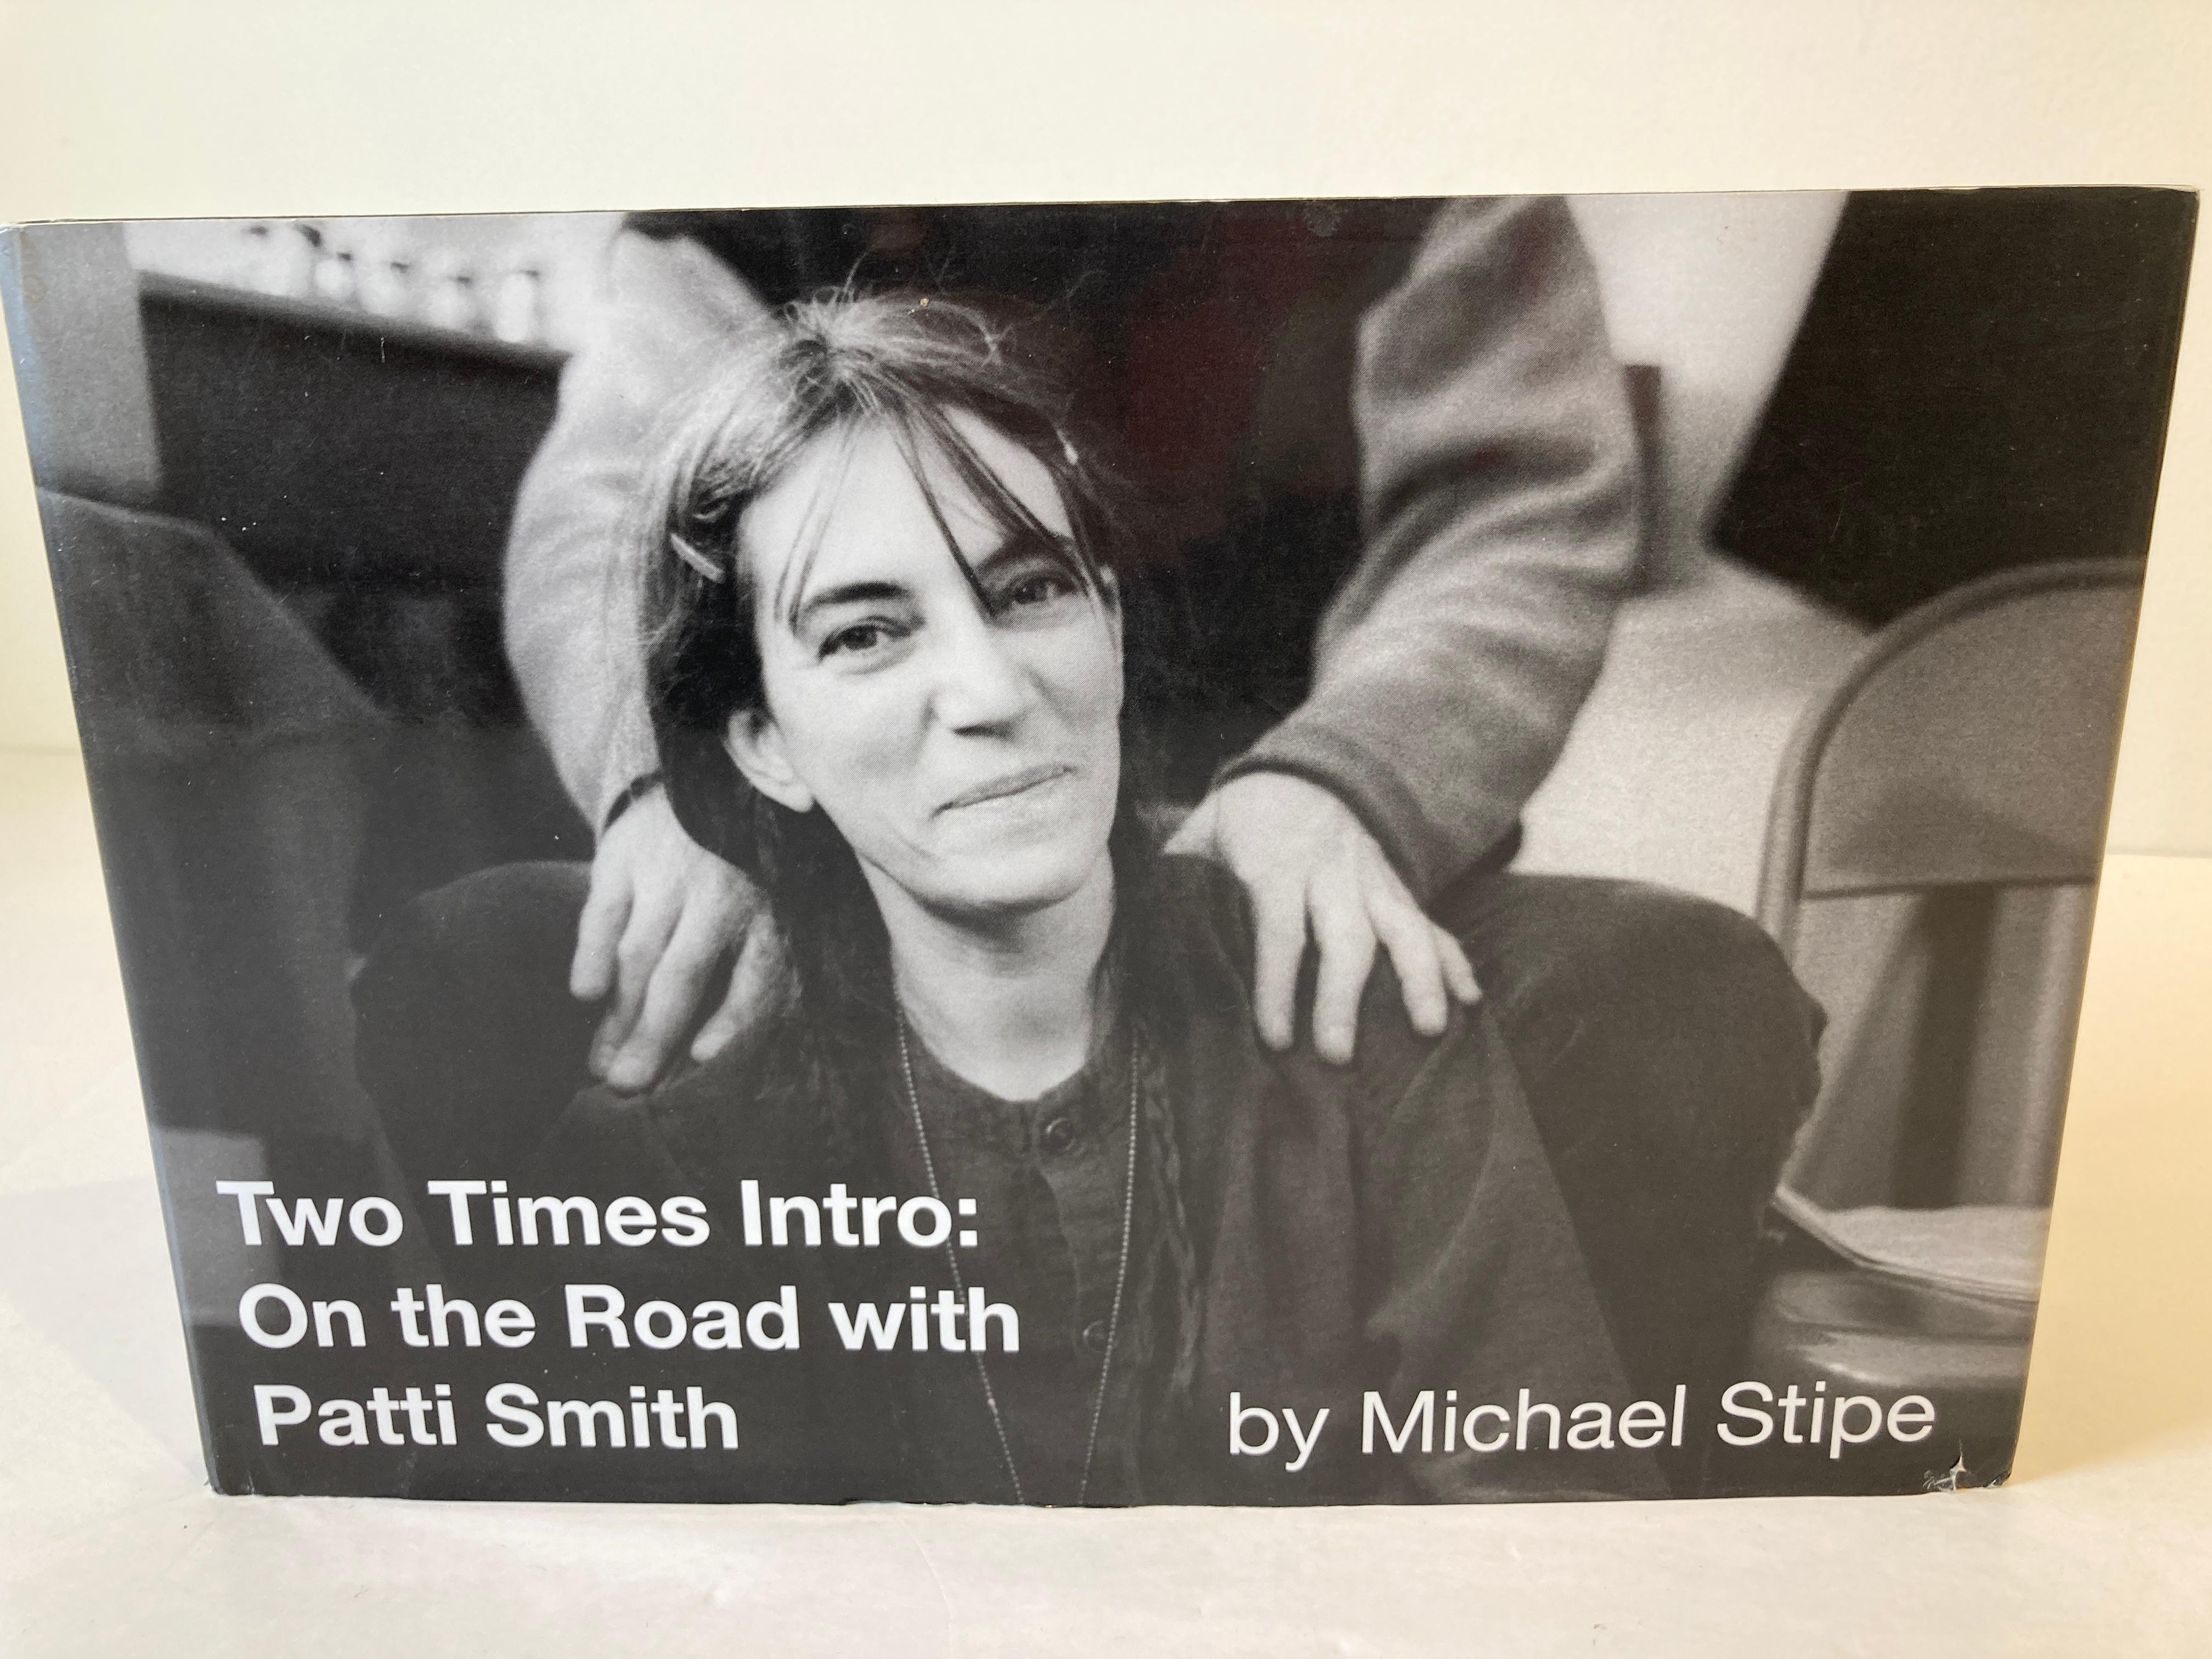 Two Times Intro: On the Road with Patti Smith
by Michael Stipe.
Offers a behind-the scenes, photographic look at a 1996 concert tour with the legendary Patti Smith, presenting more than one hundred images that capture life on the road with the